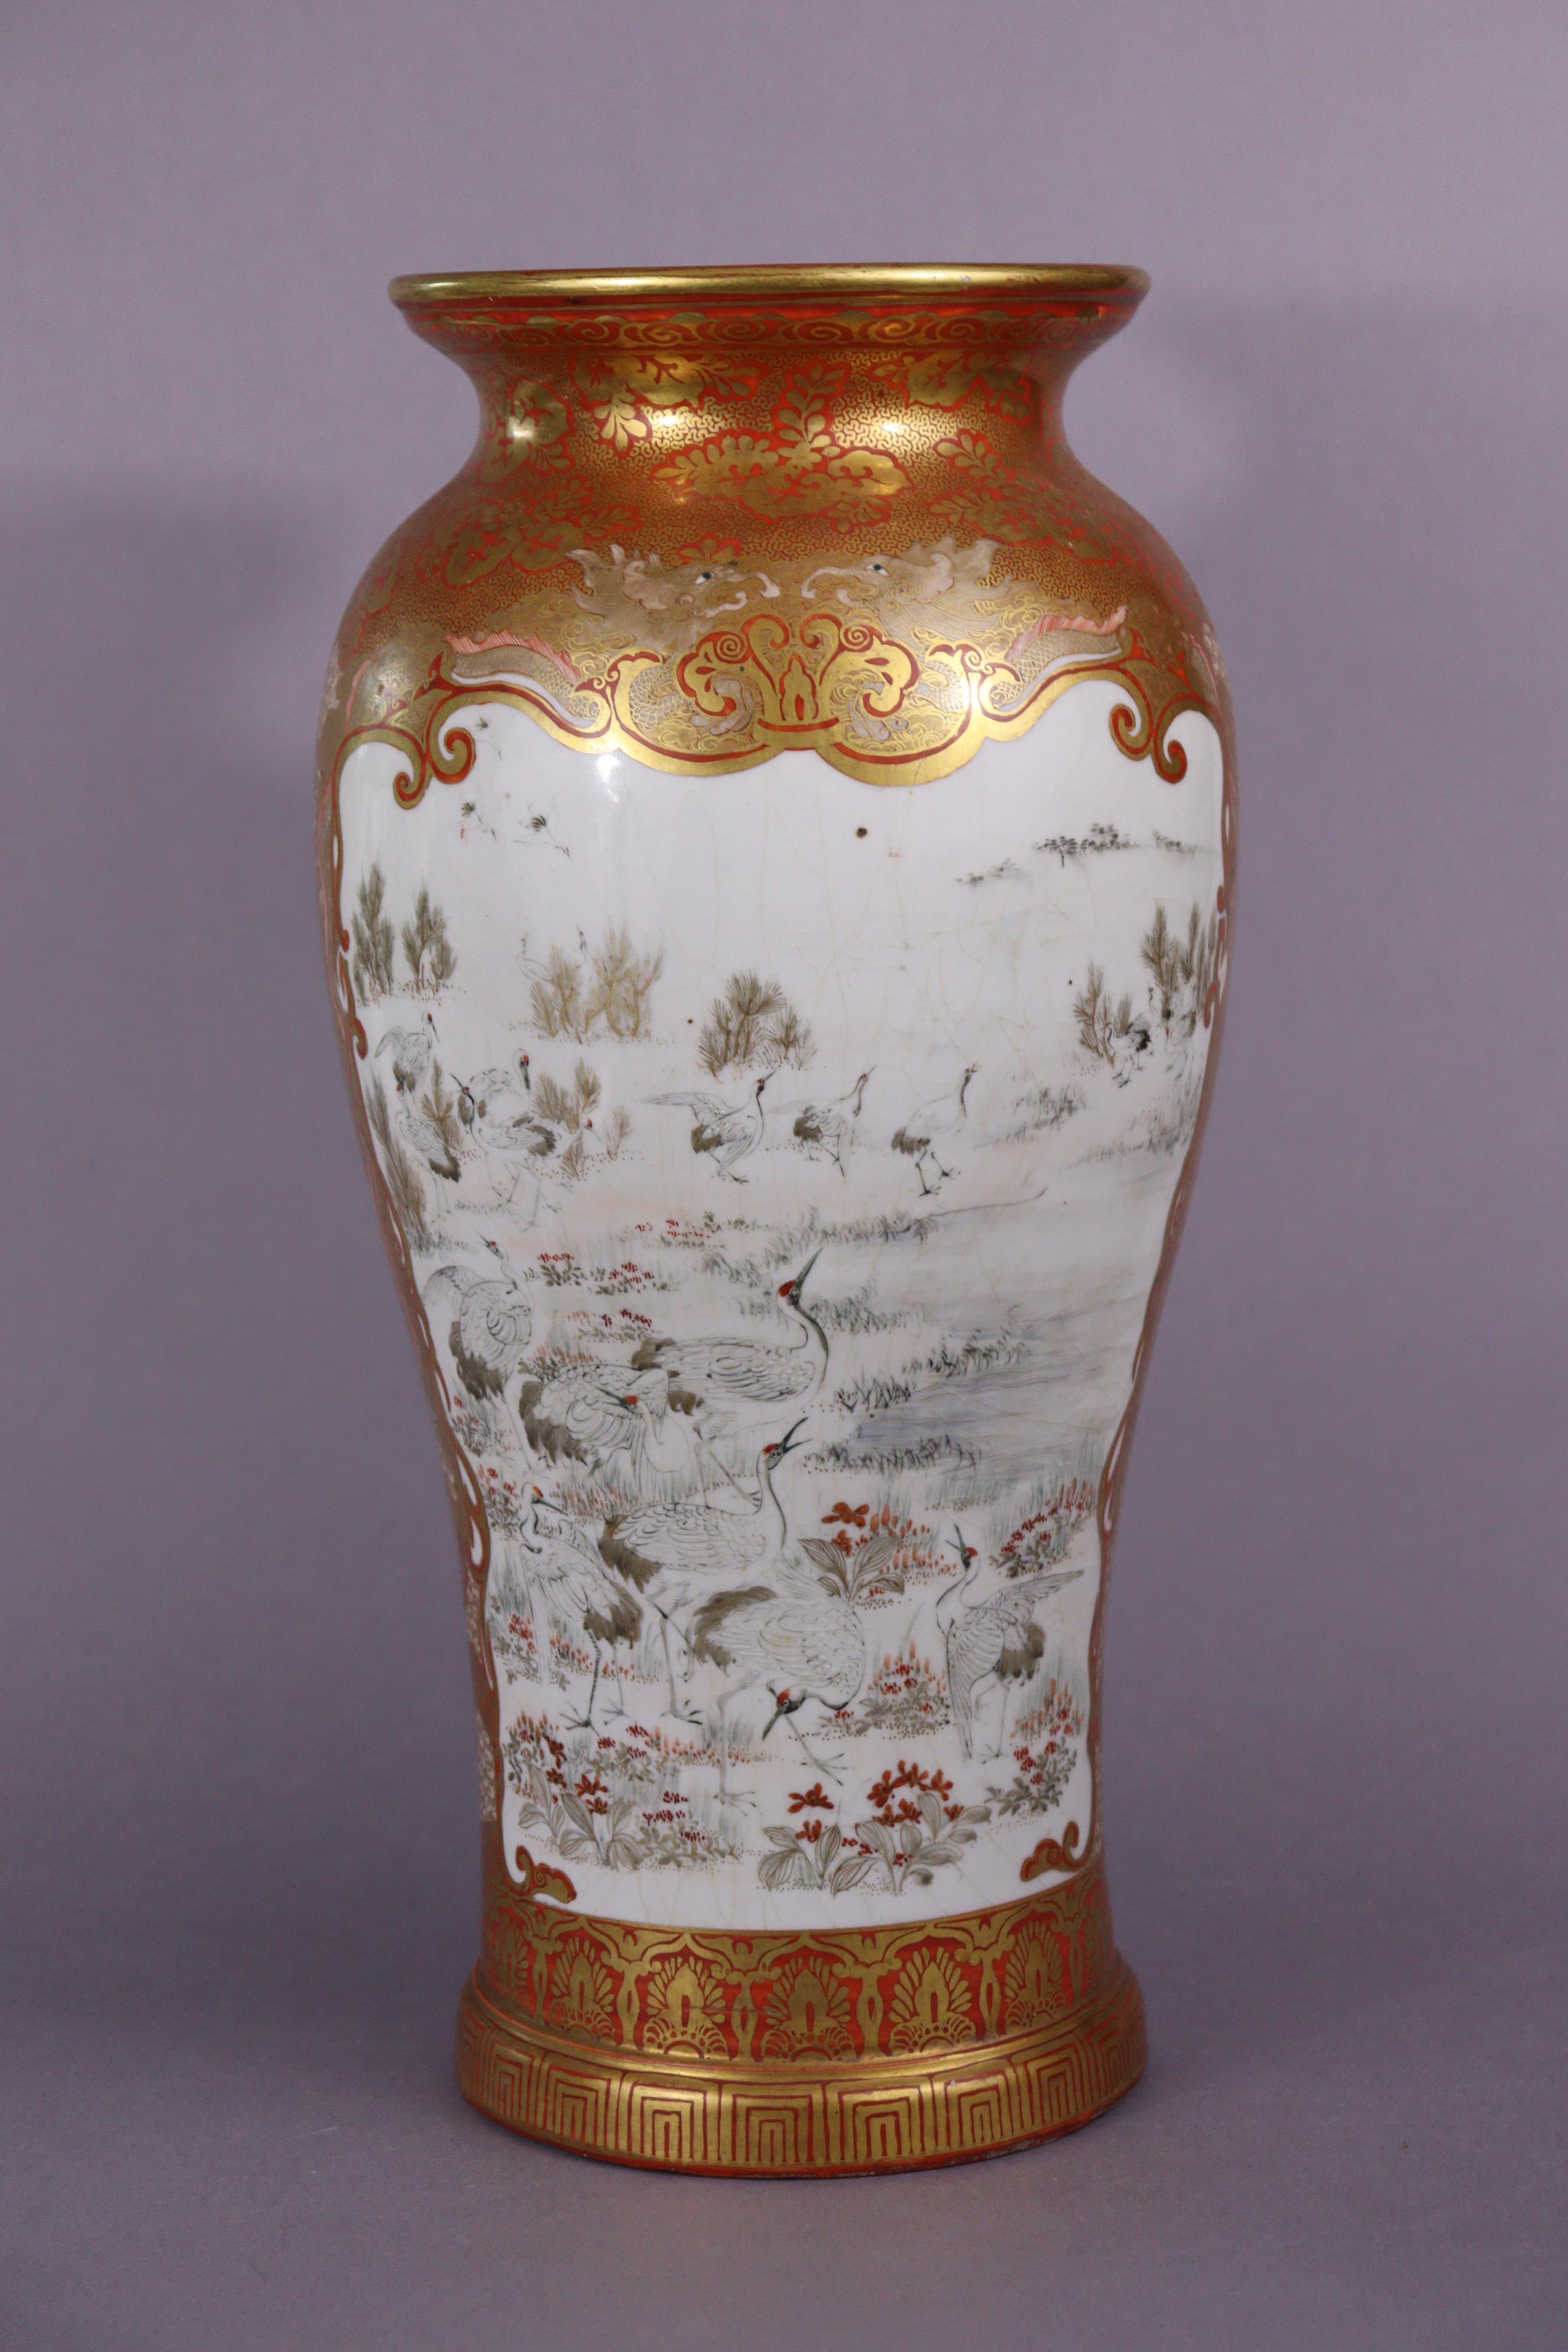 A late 19th century Japanese Kutani porcelain baluster vase with finely painted scenes of ladies & - Image 2 of 5